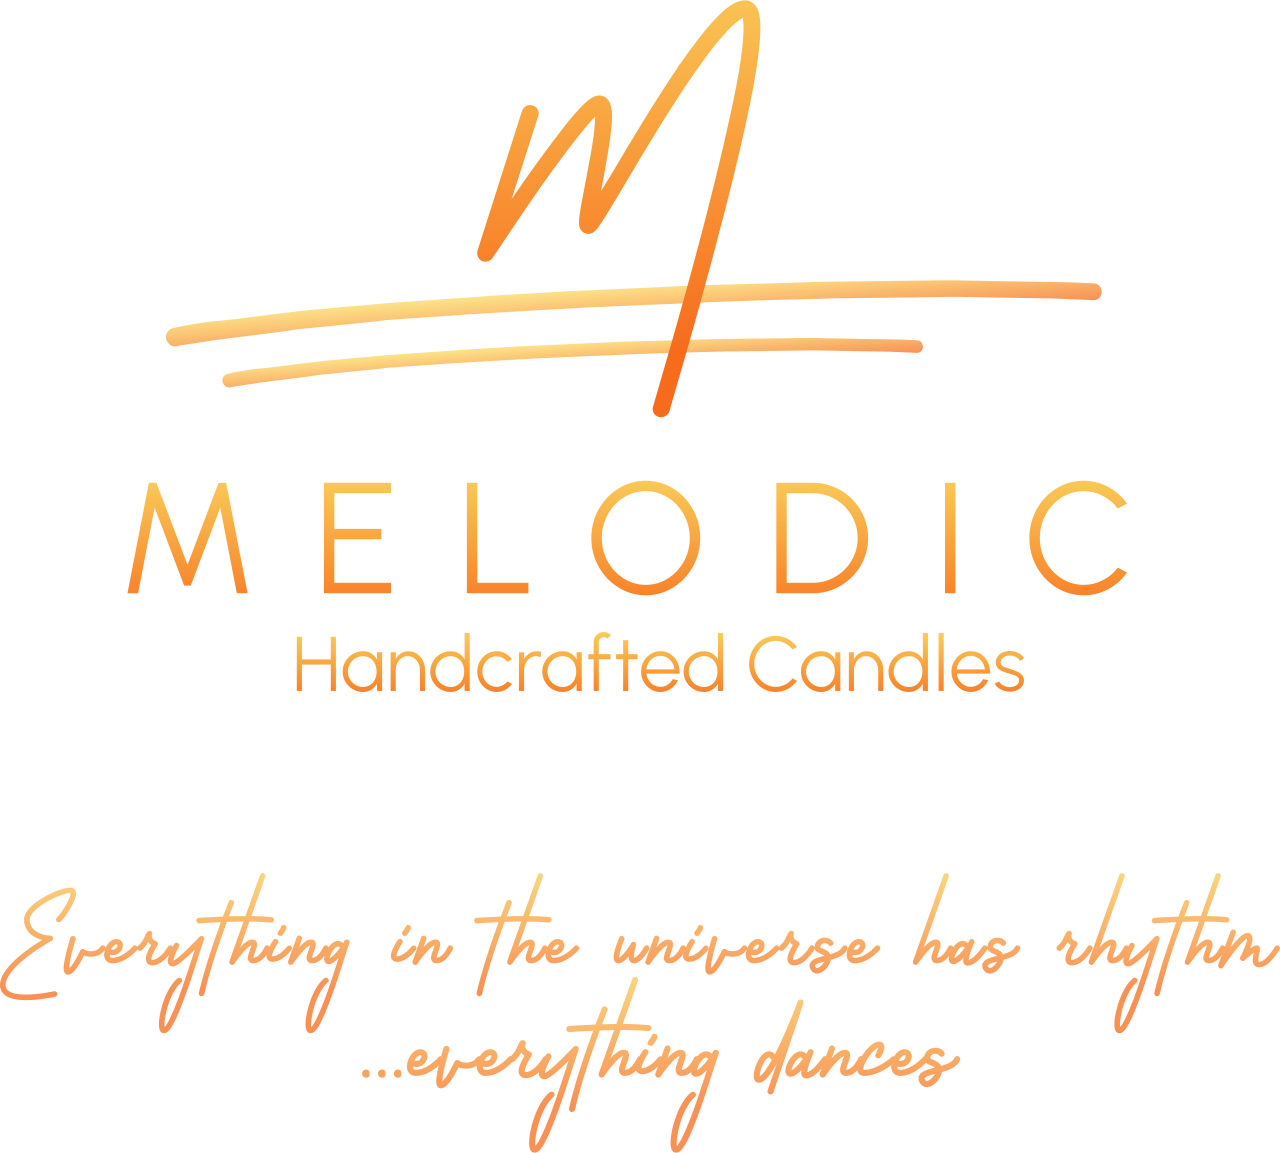 MELODIC 's web page